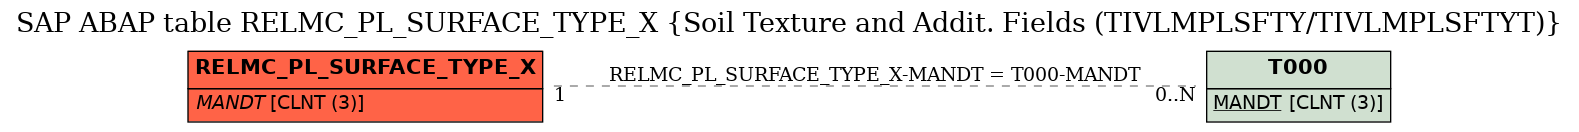 E-R Diagram for table RELMC_PL_SURFACE_TYPE_X (Soil Texture and Addit. Fields (TIVLMPLSFTY/TIVLMPLSFTYT))